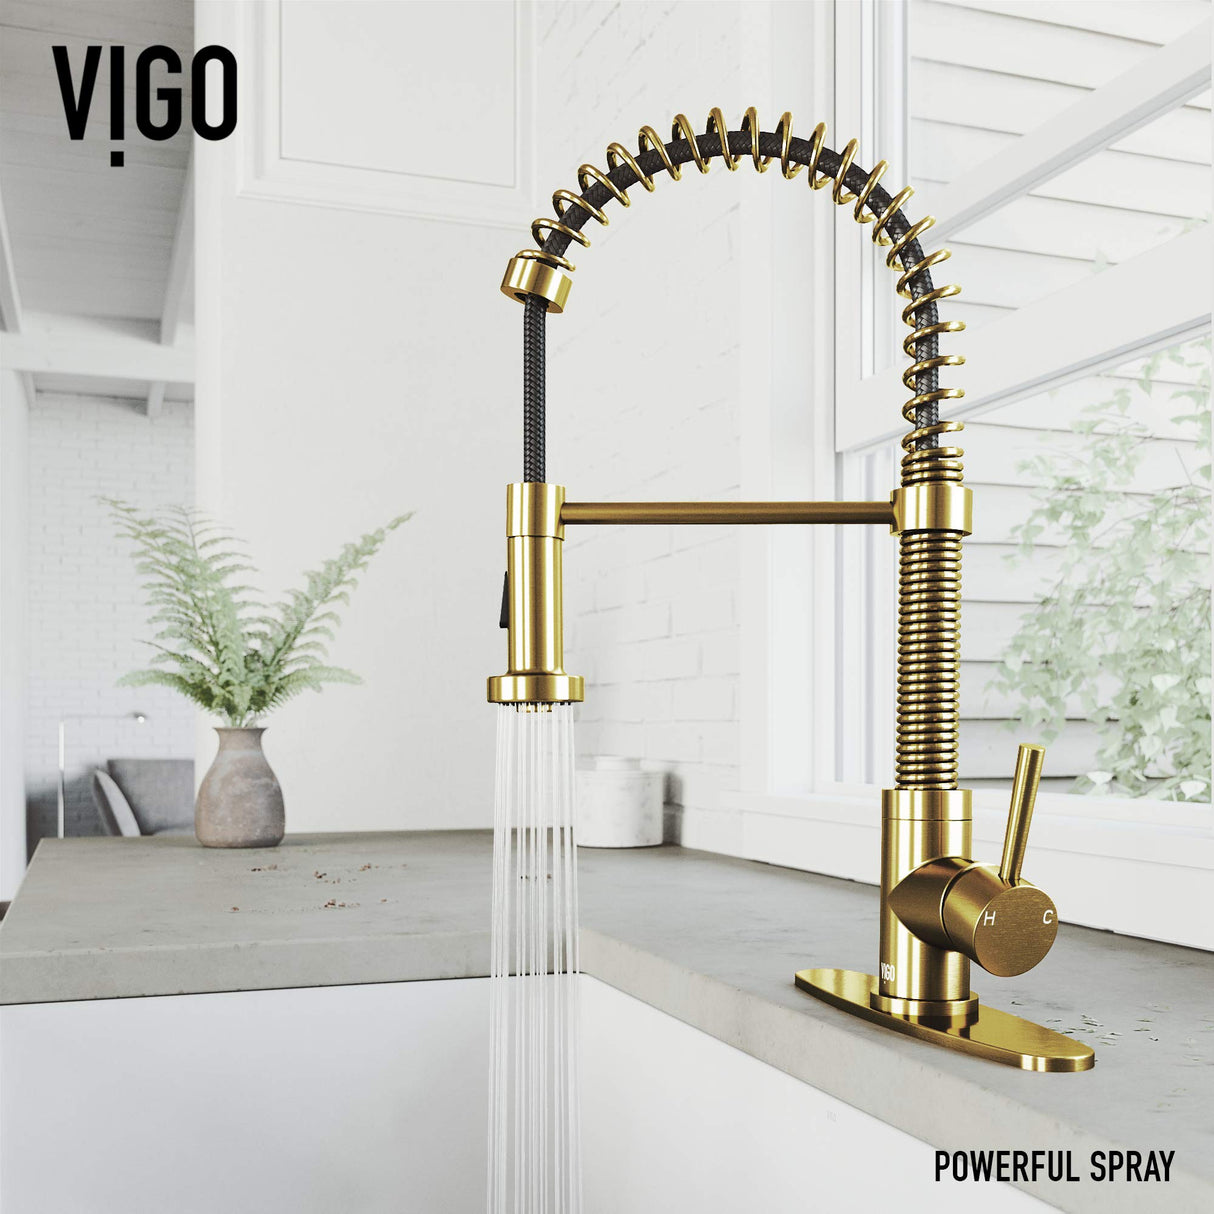 VIGO VG02001MGK1 19" H Edison Single-Handle with Pull-Down Sprayer Kitchen Faucet with Deck Plate in Matte Gold